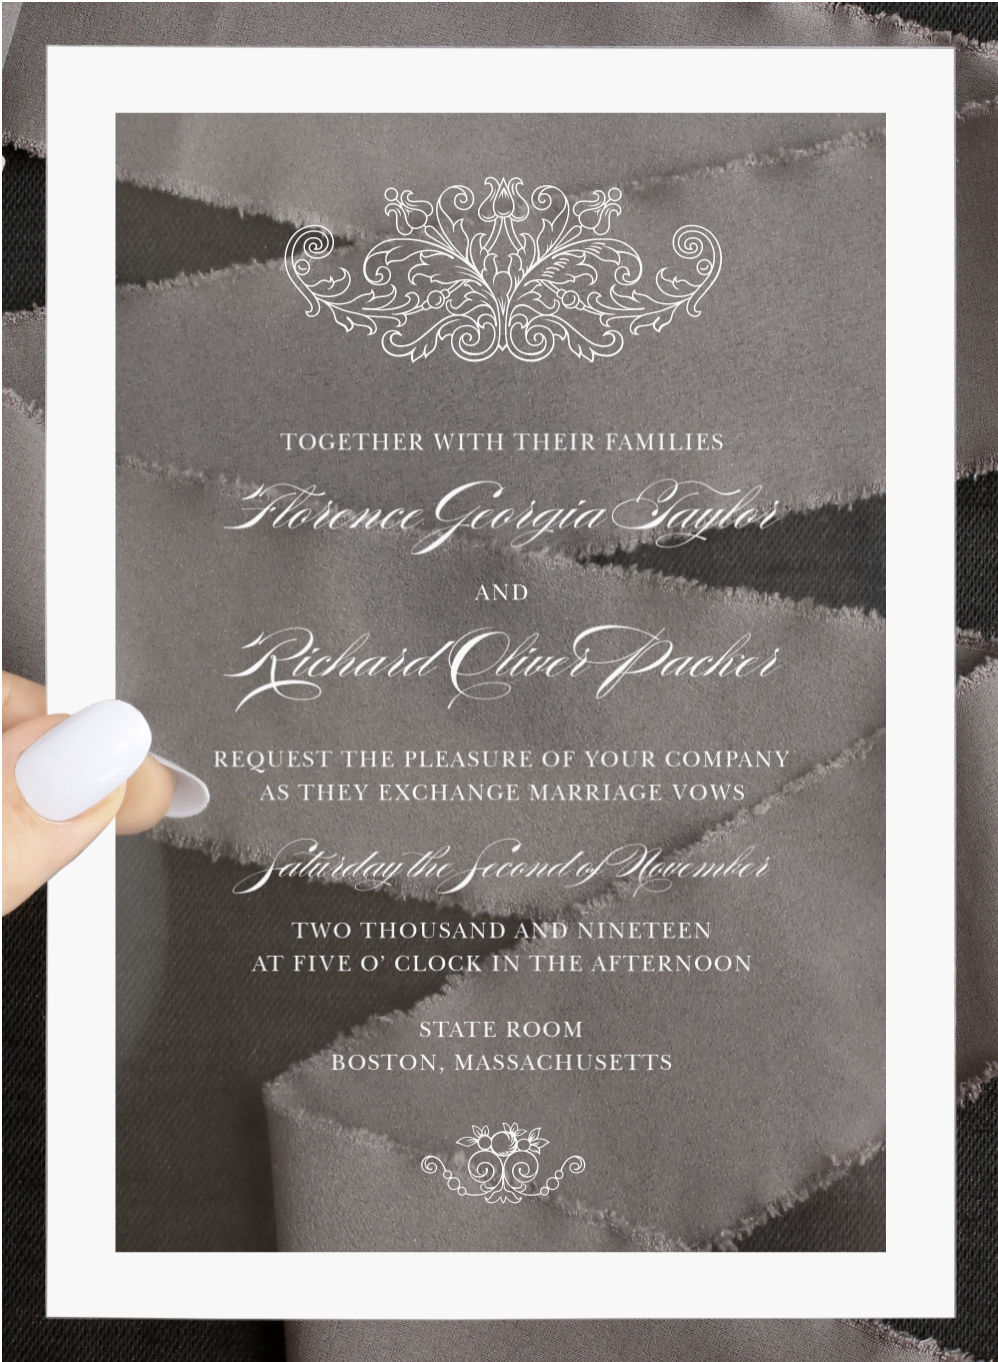 Clear Wedding Invitations - Vintage Damask Wedding Invitations by Basic Invite.png